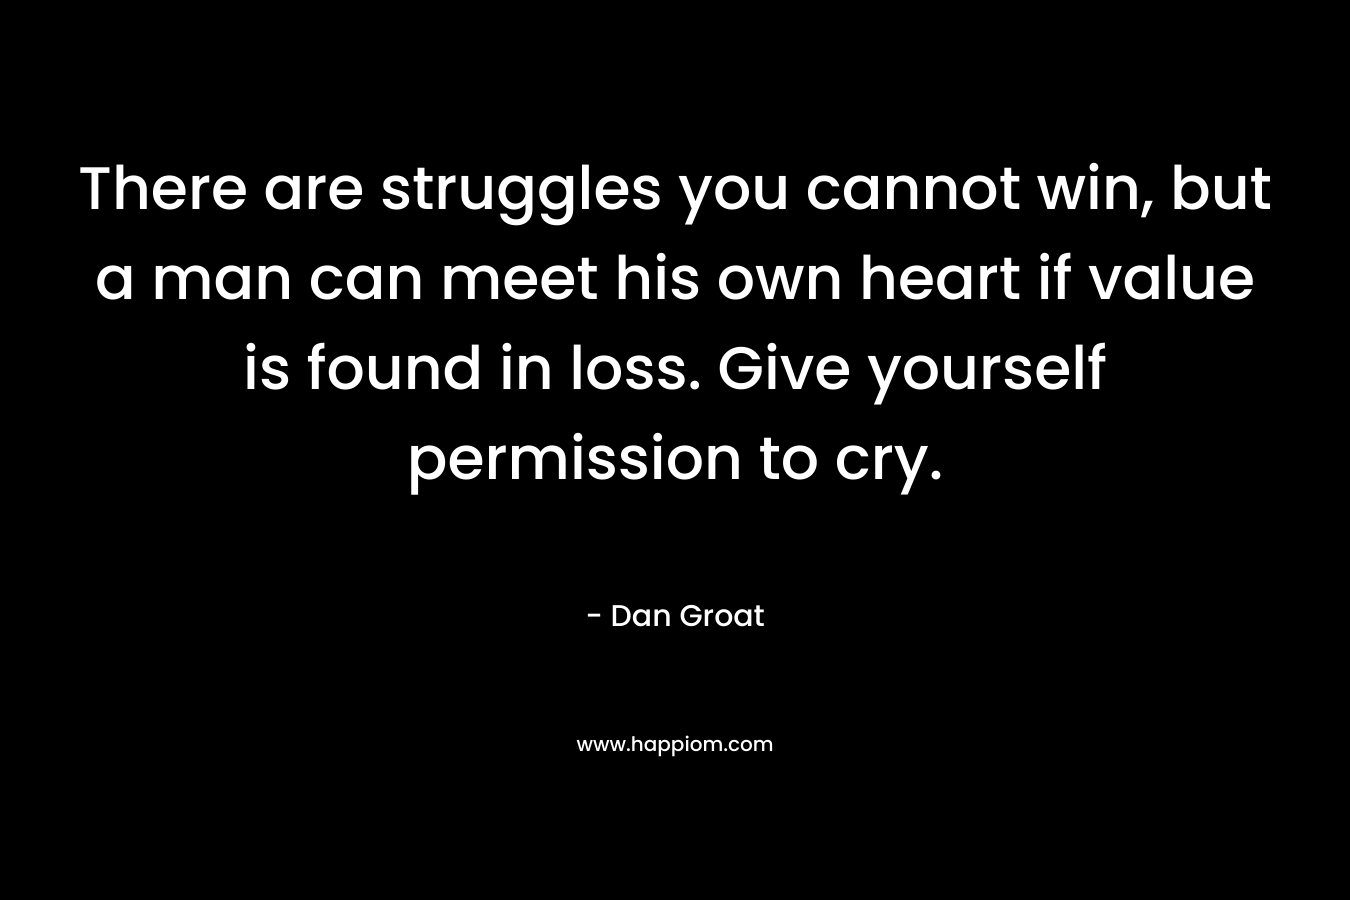 There are struggles you cannot win, but a man can meet his own heart if value is found in loss. Give yourself permission to cry.